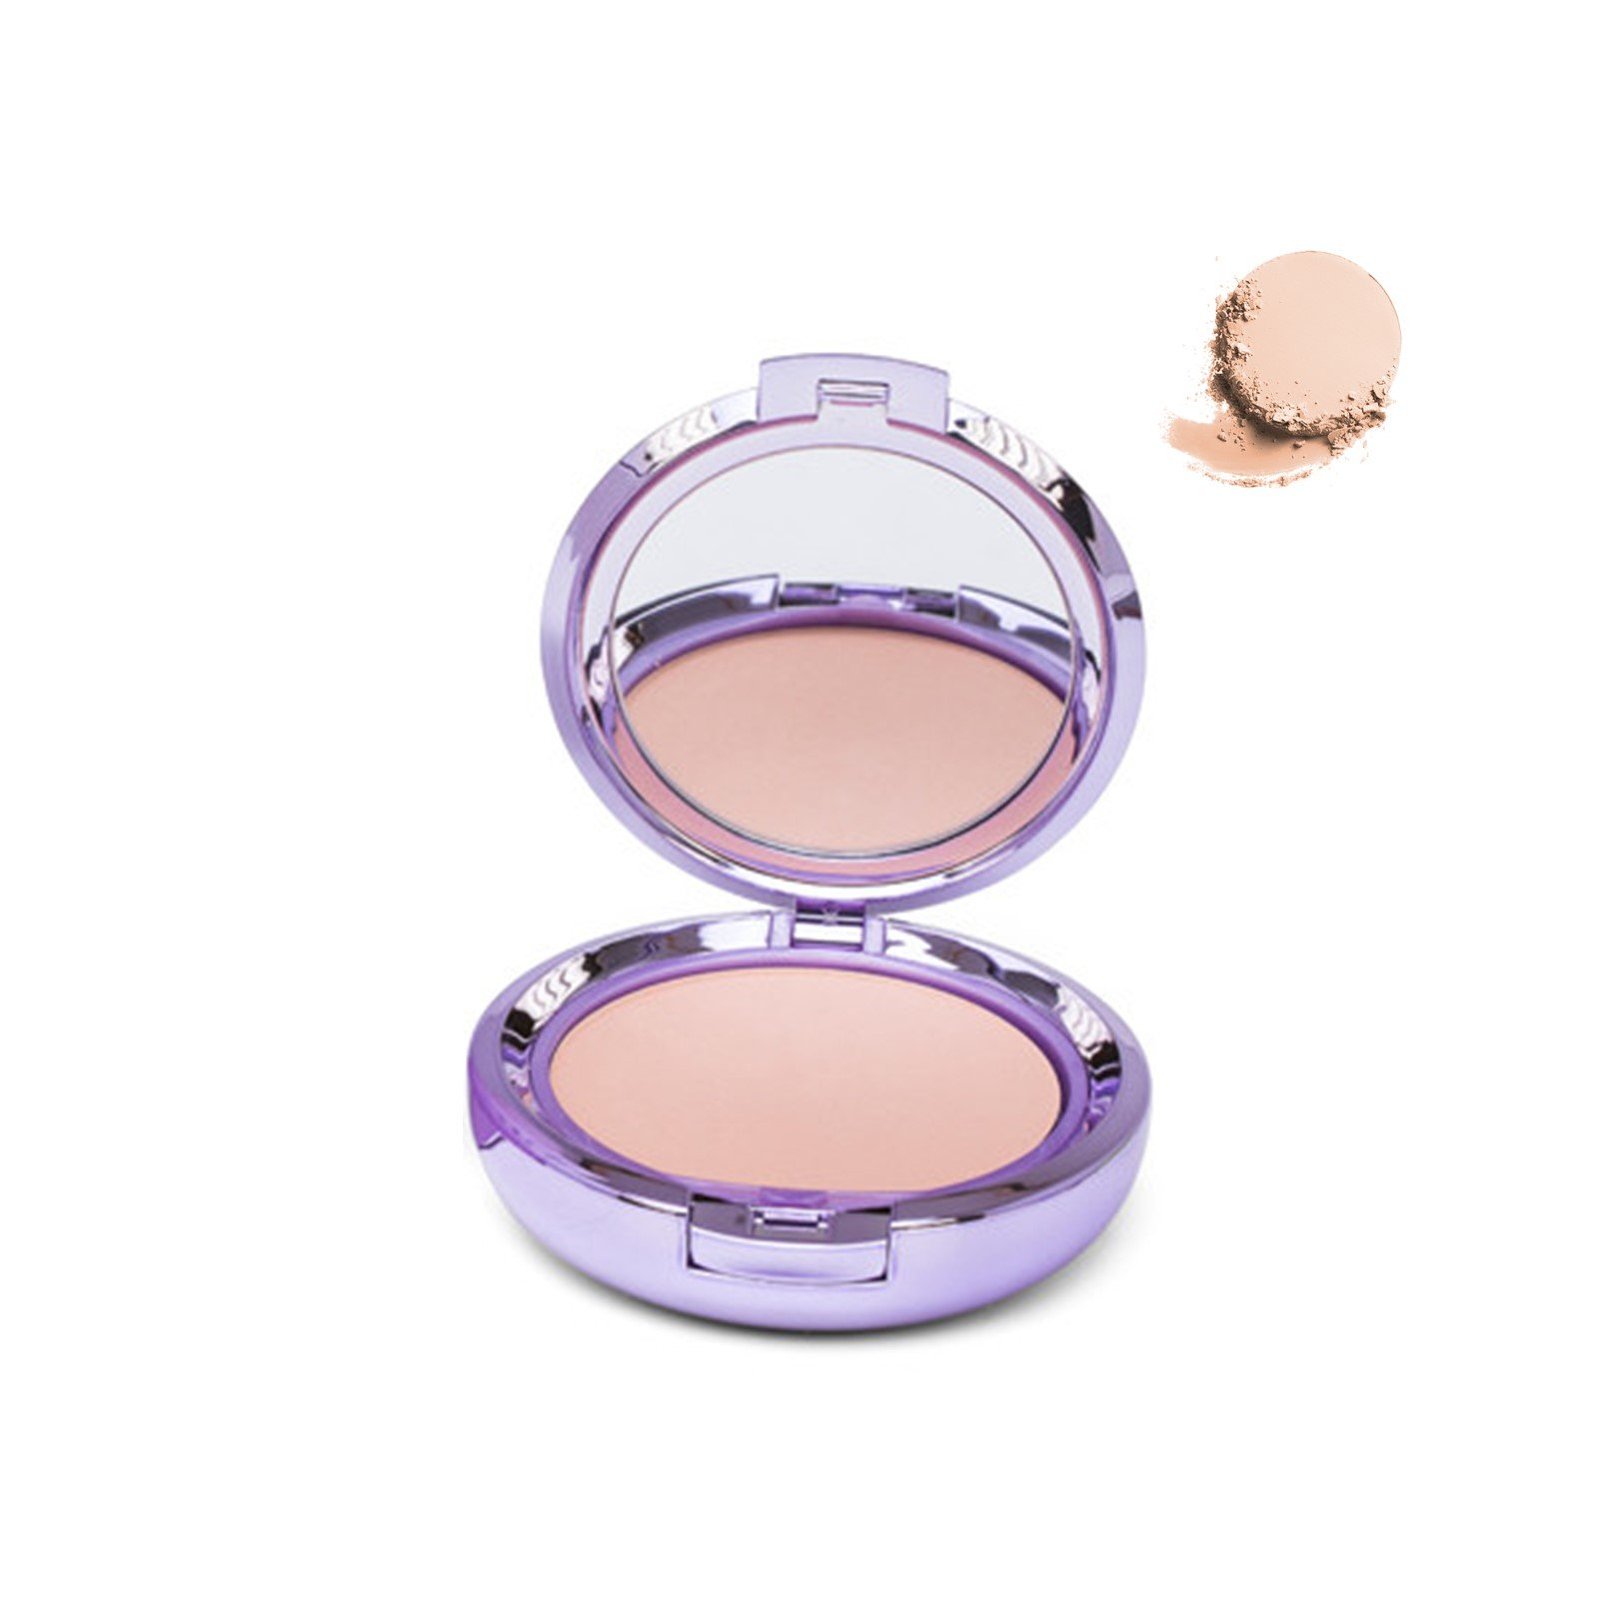 Covermark Compact Powder Oily-Acneic Skin 3 10g (0.35 oz)